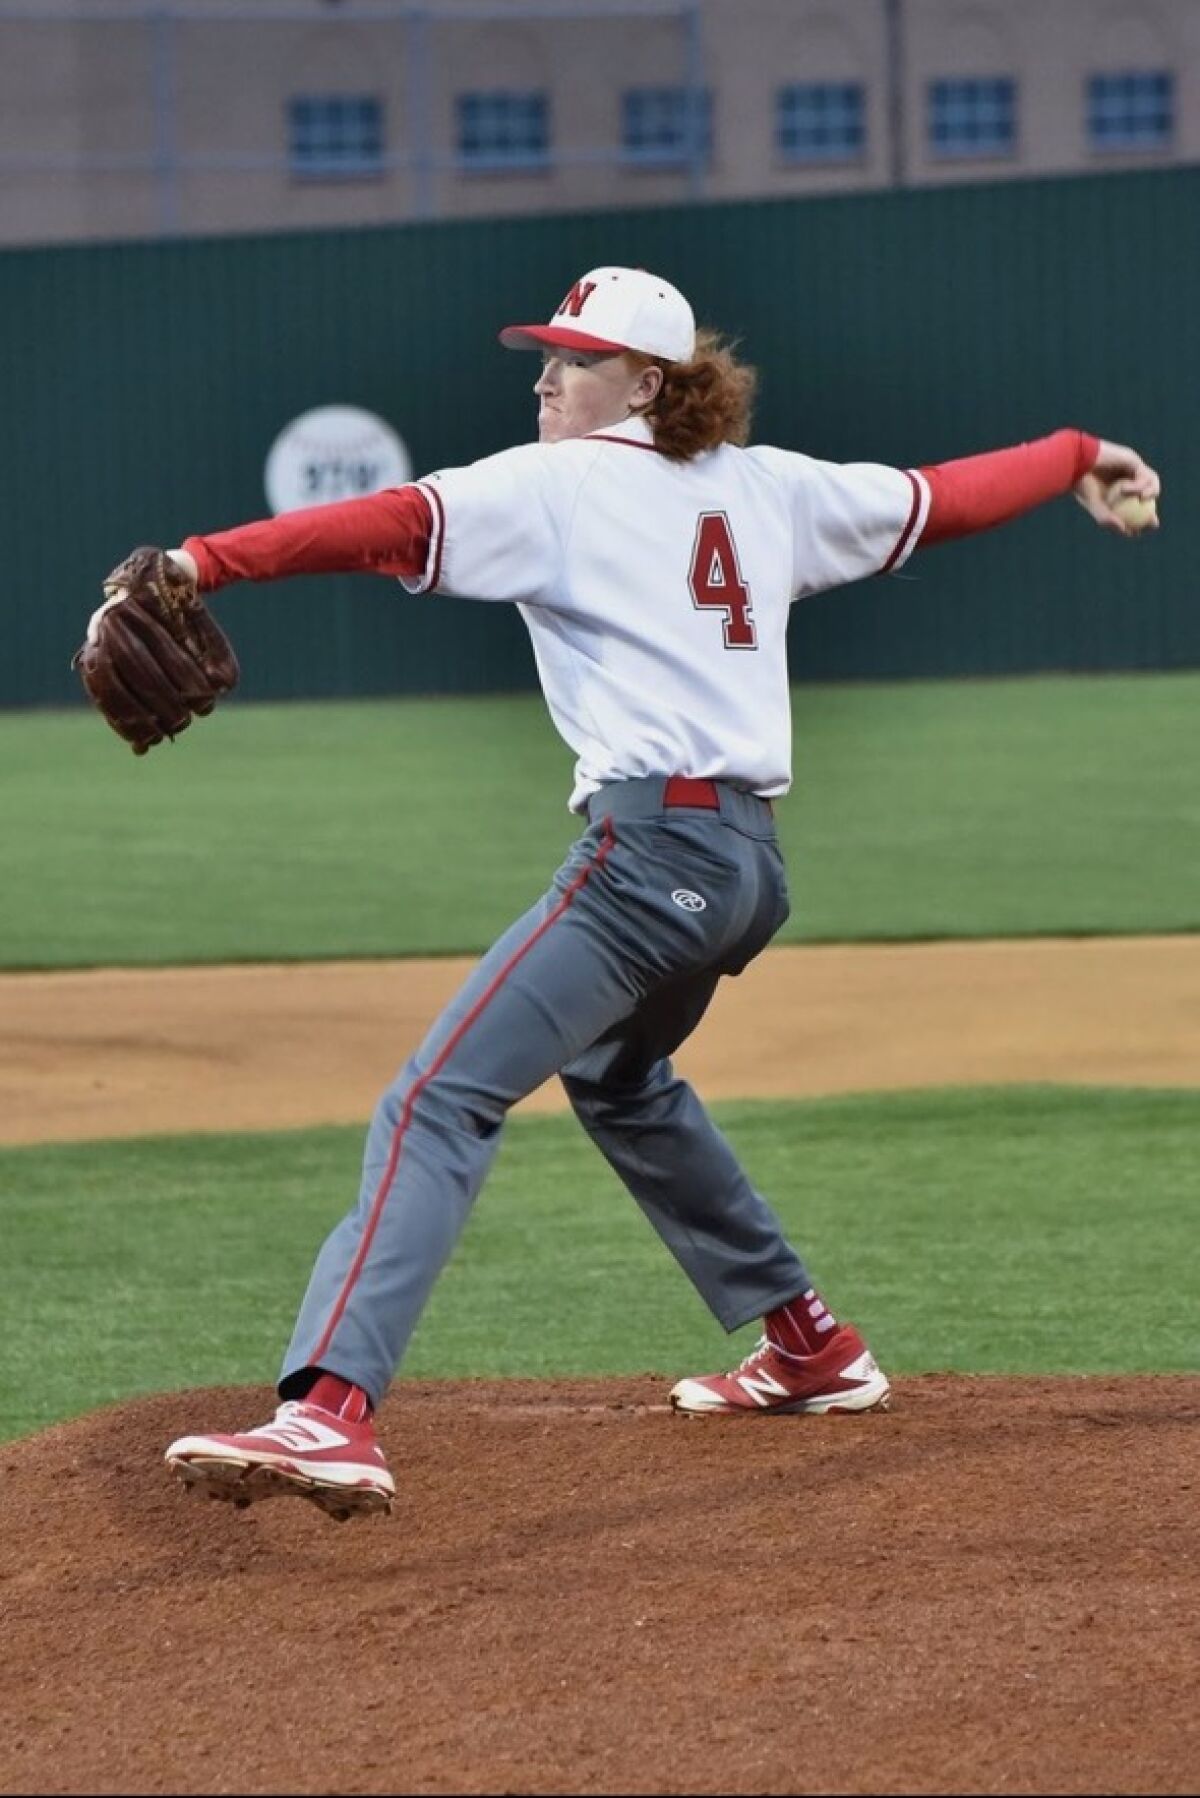 Dustin May pitching for Northwest High School in Fort Worth, Texas.